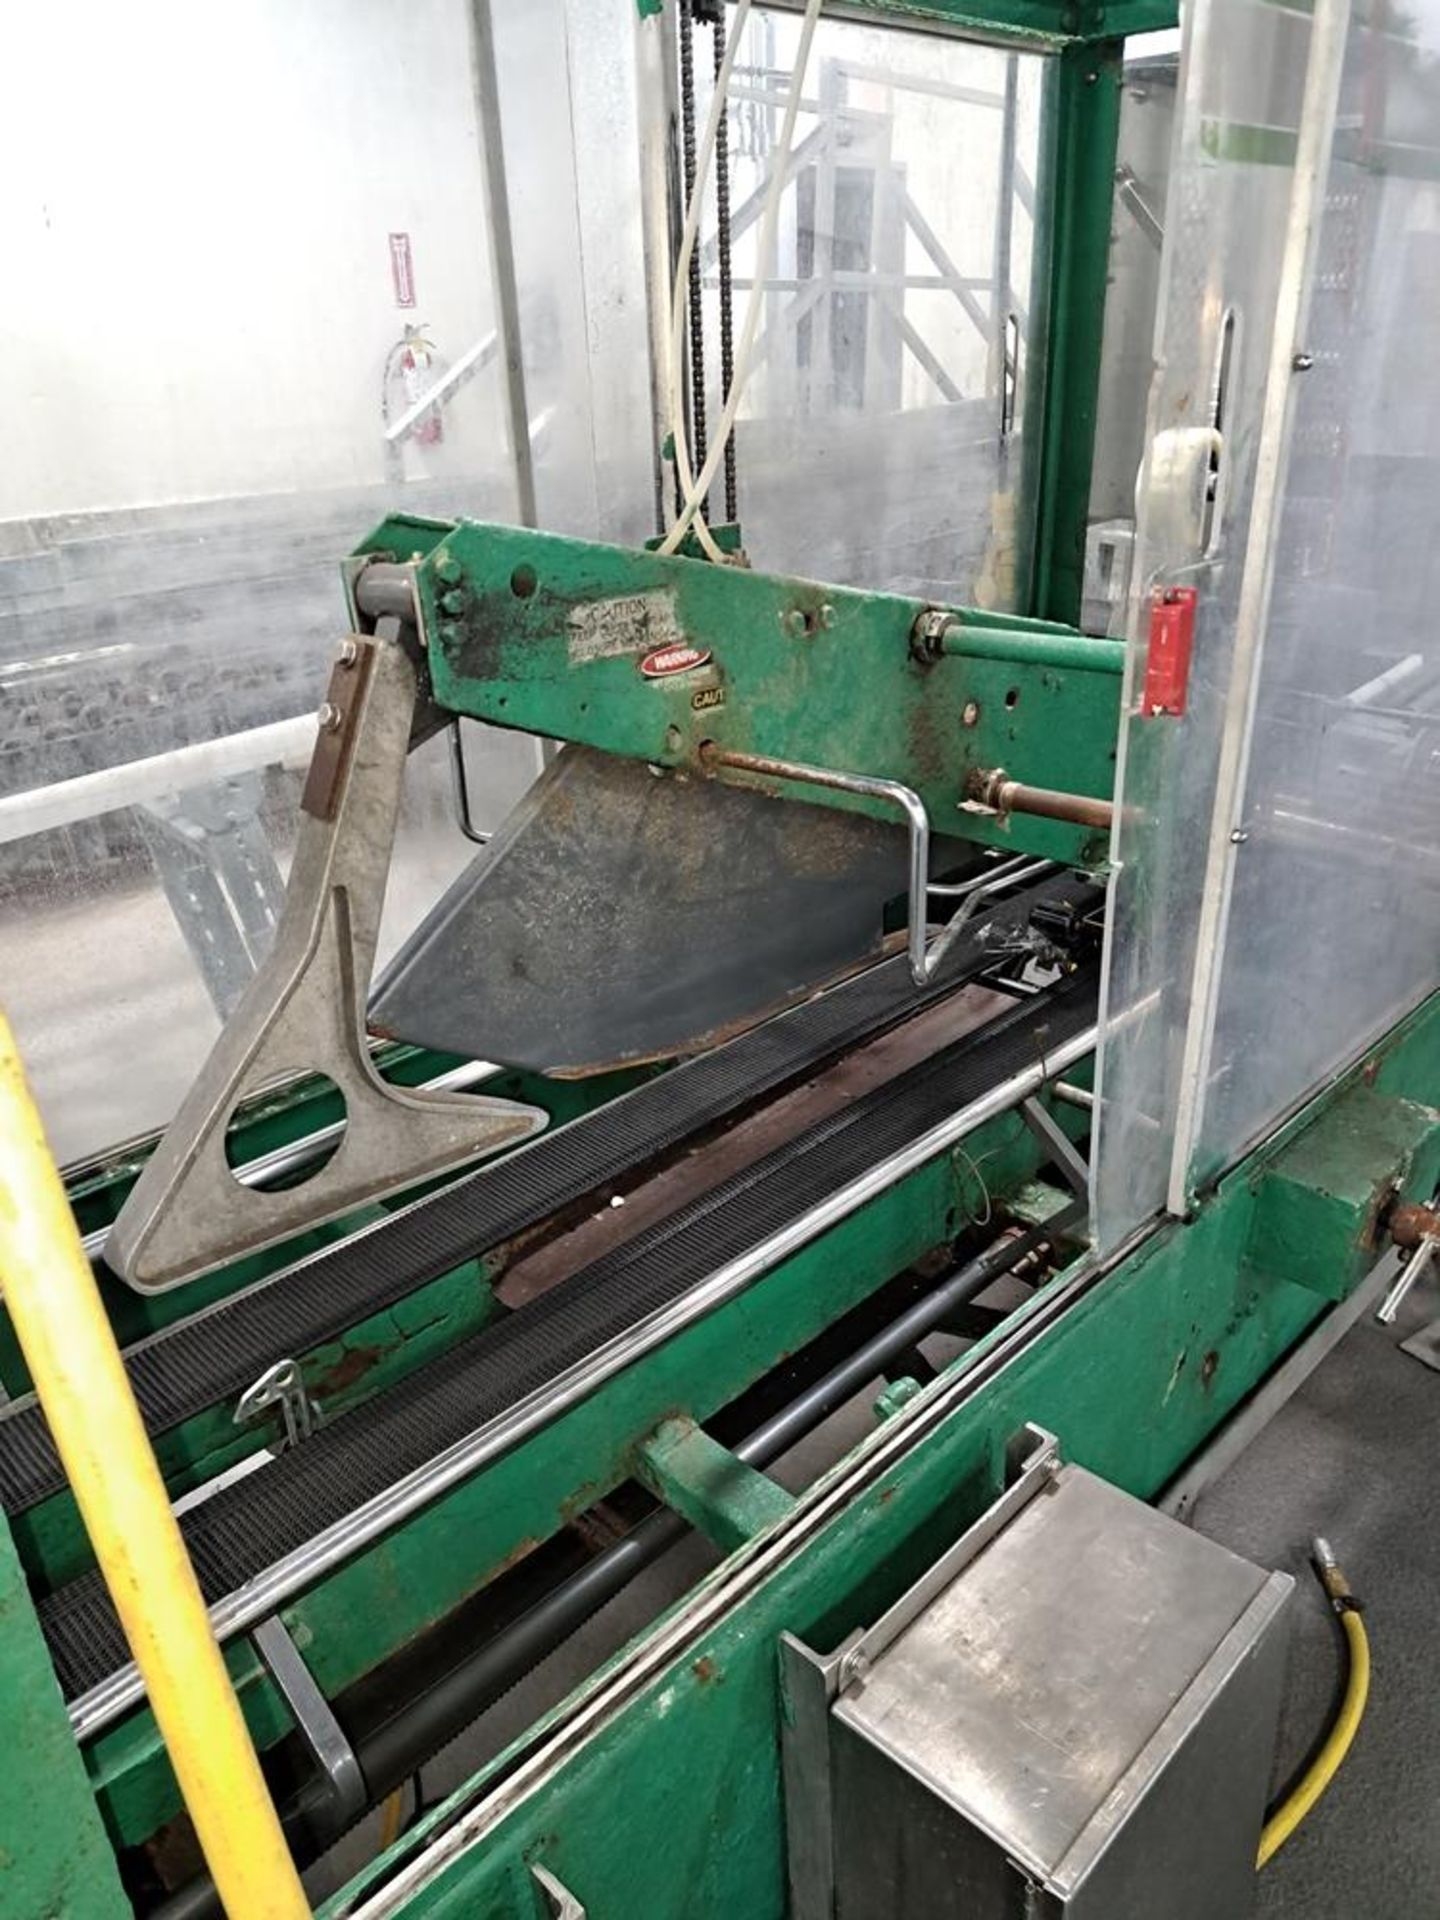 Tape Machine, top bottom tape heads, infeed conveyor, roller conveyor outfeed: Required Loading - Image 3 of 4